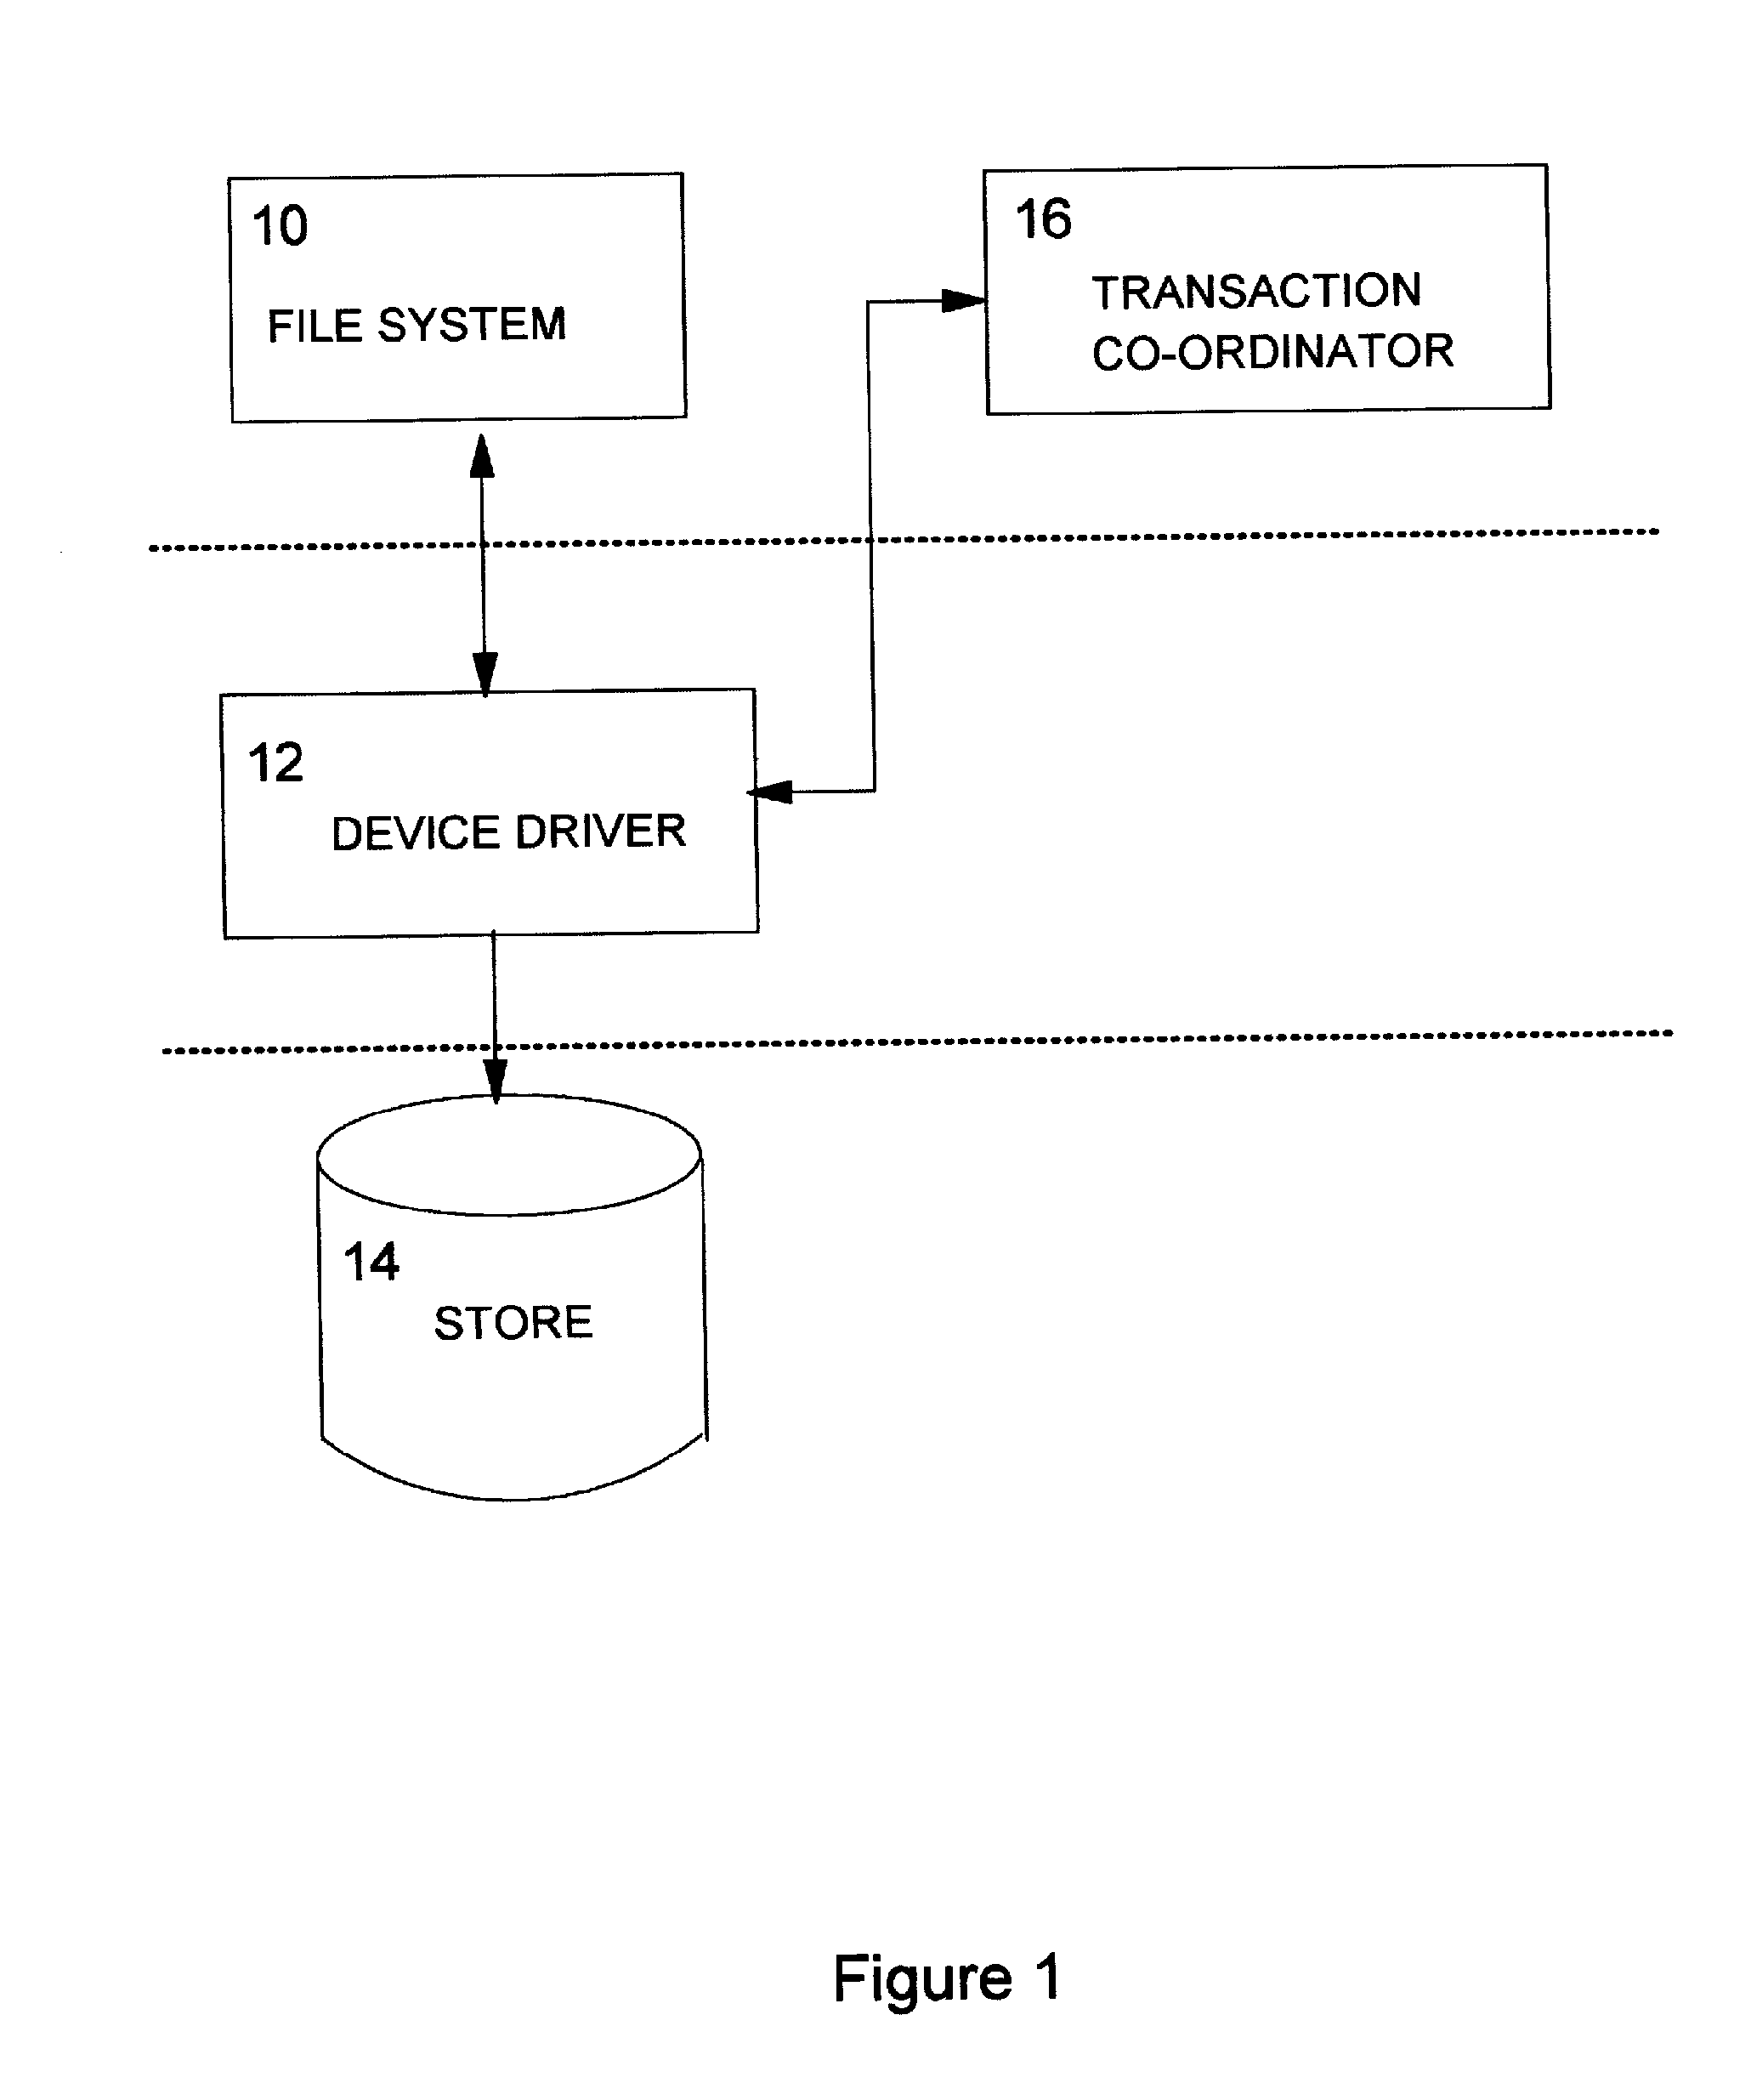 Performing a data write on a storage device